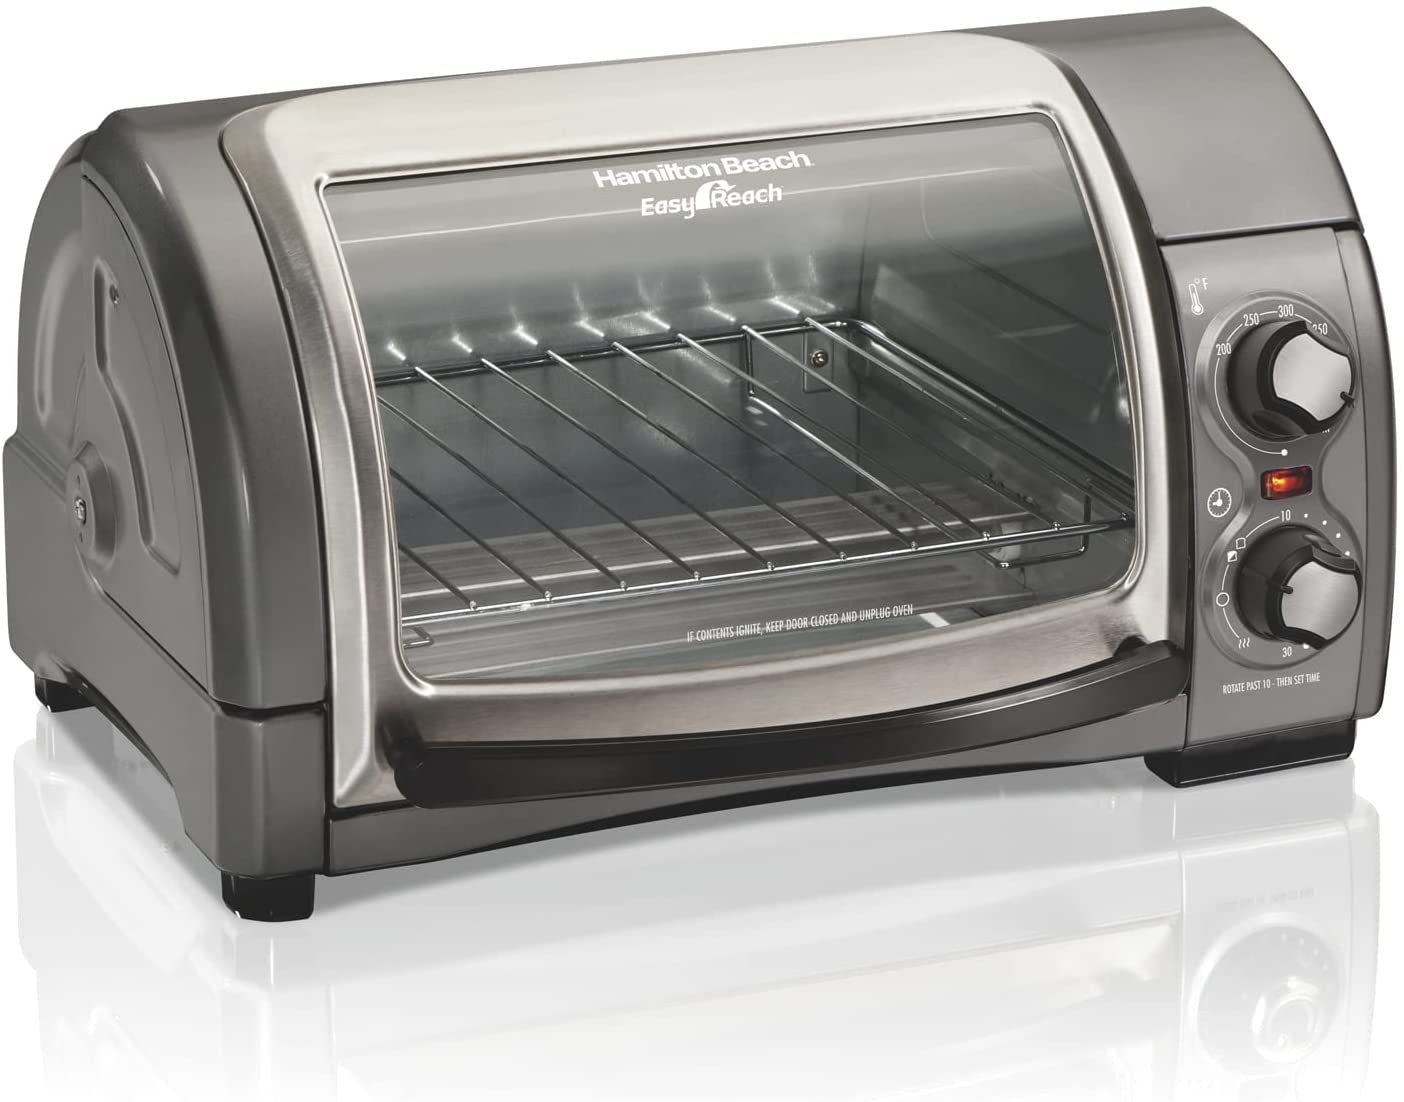 Efficient 4-Slice Countertop Toaster Oven with Convenient Roll-Top Door, Powerful 1200 Watts, Accommodates 9” Pizza, Versatile 3 Cooking Functions (Bake, Broil, Toast), Sleek Silver Finish 